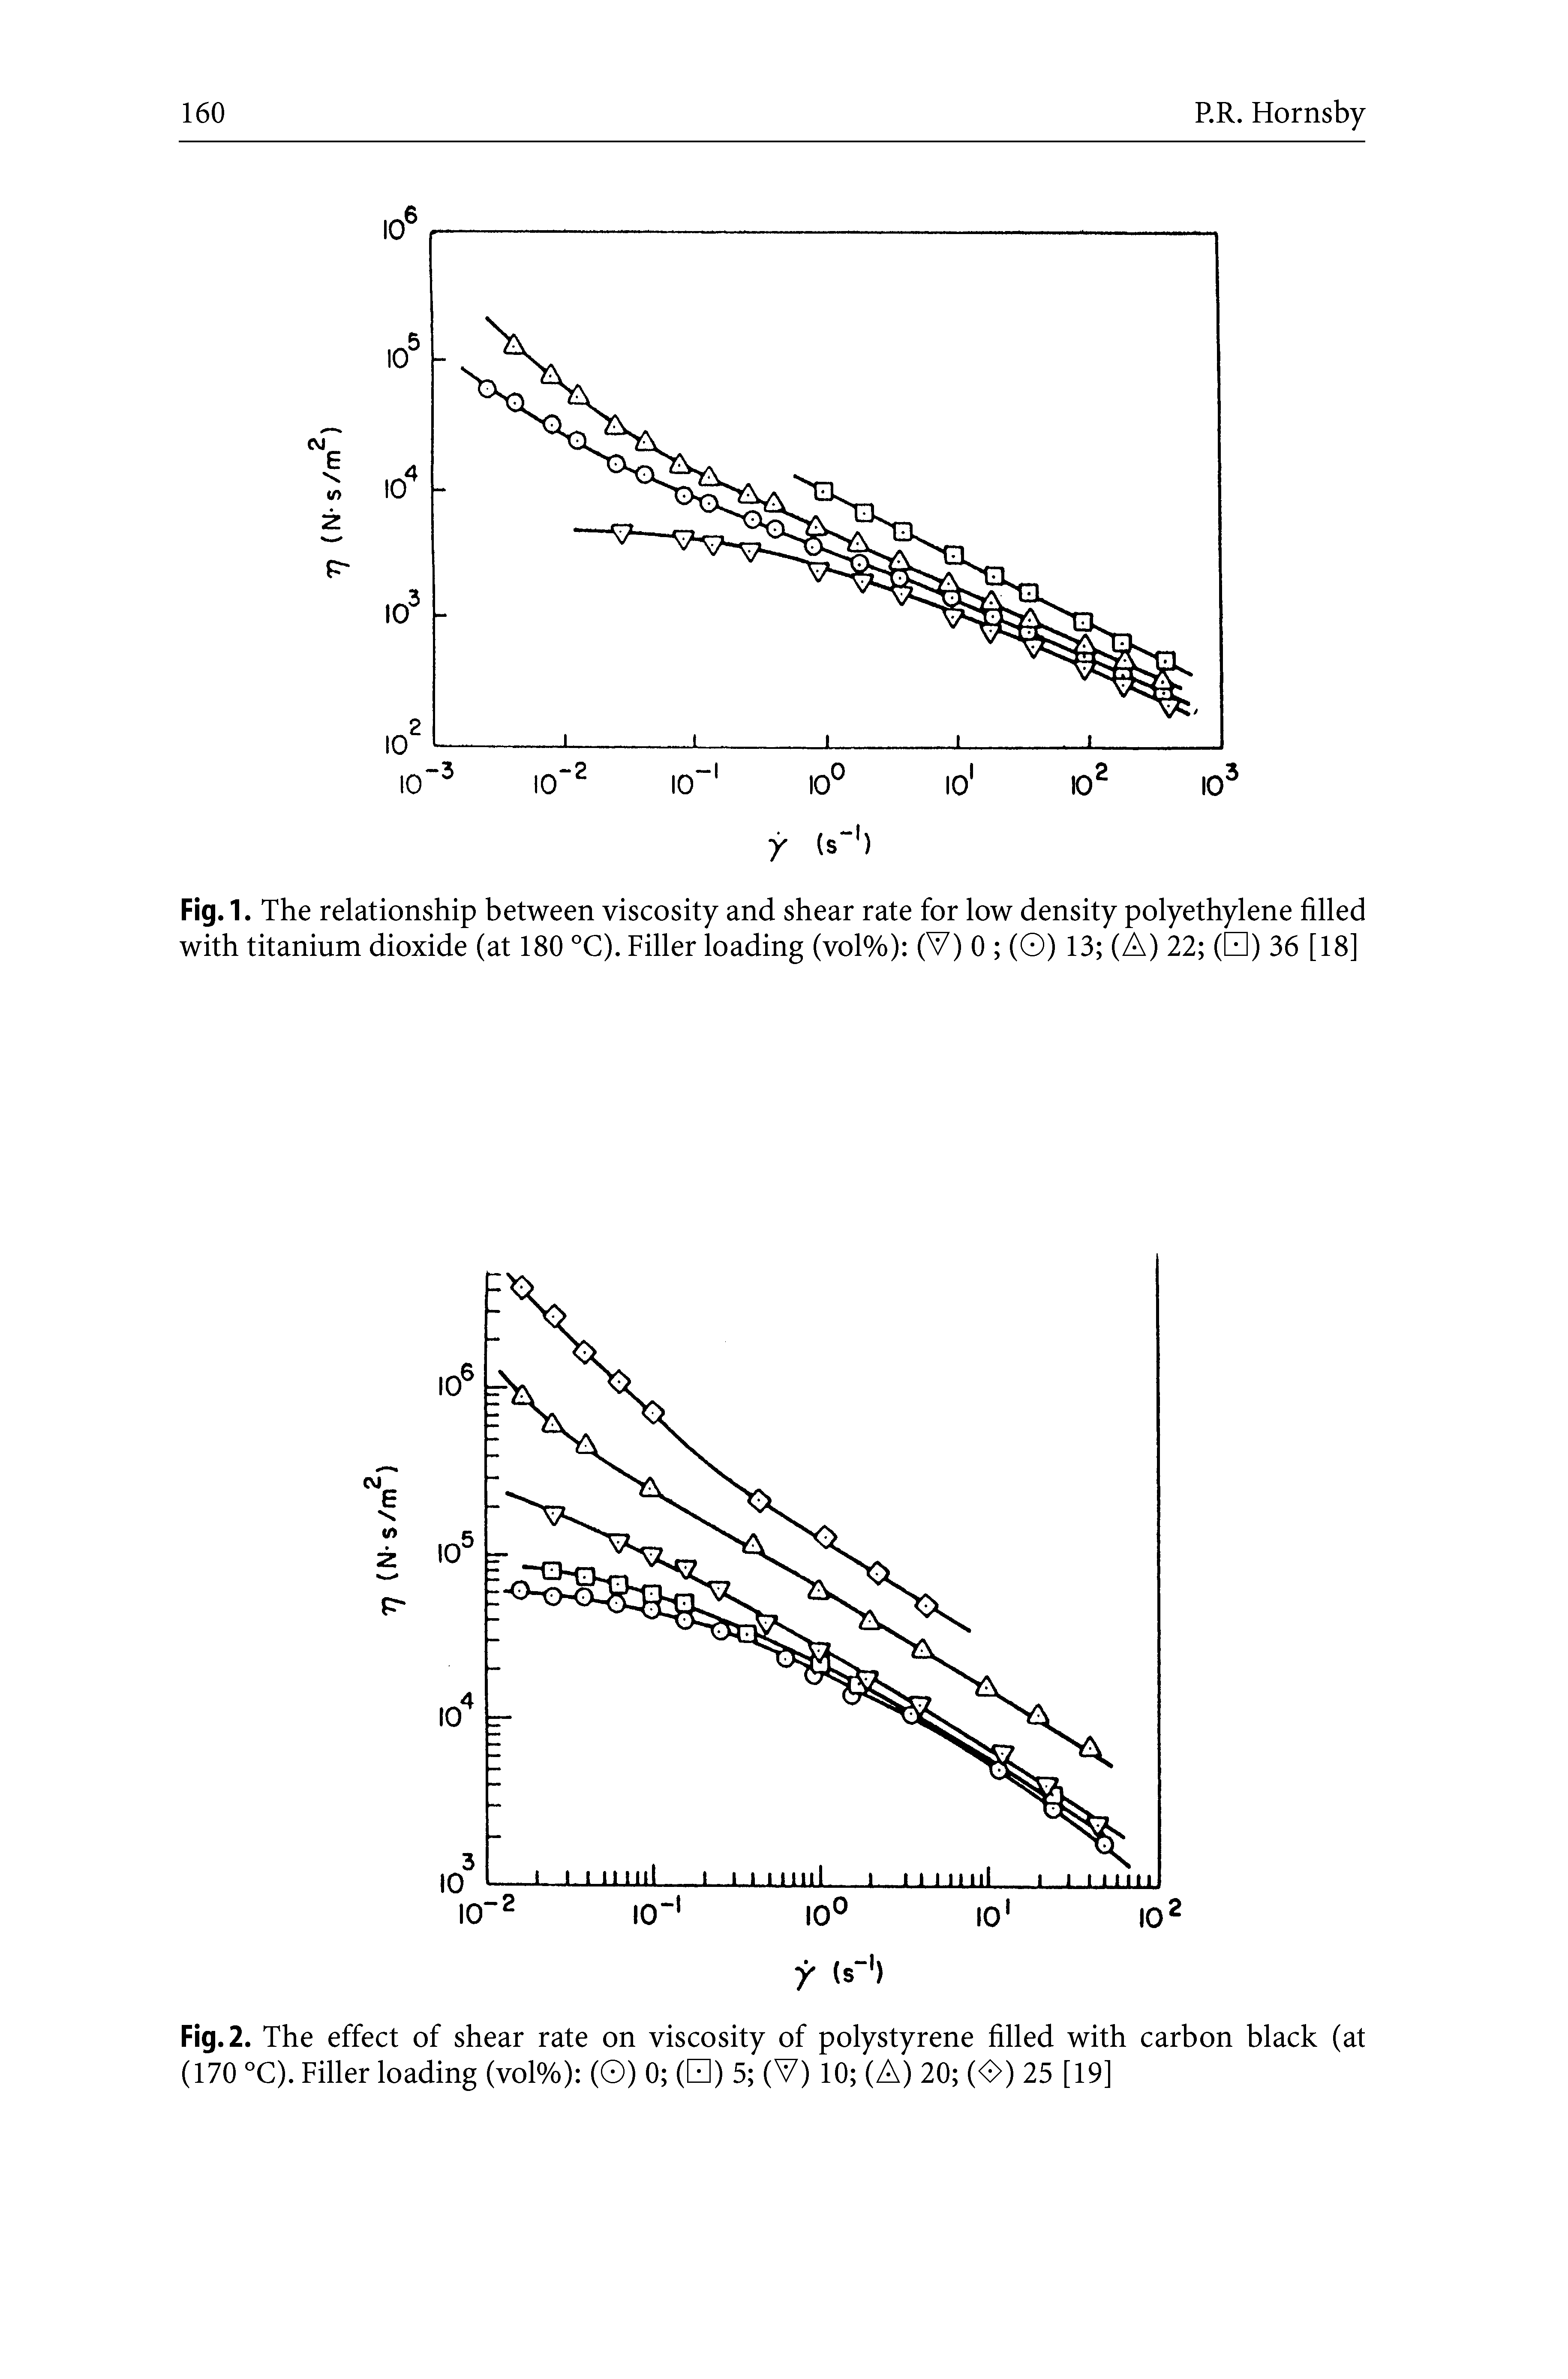 Fig.1. The relationship between viscosity and shear rate for low density polyethylene filled with titanium dioxide (at 180 °C). Filler loading (vol%) (V) 0 (O) 13 (A) 22 ( ) 36 [18]...